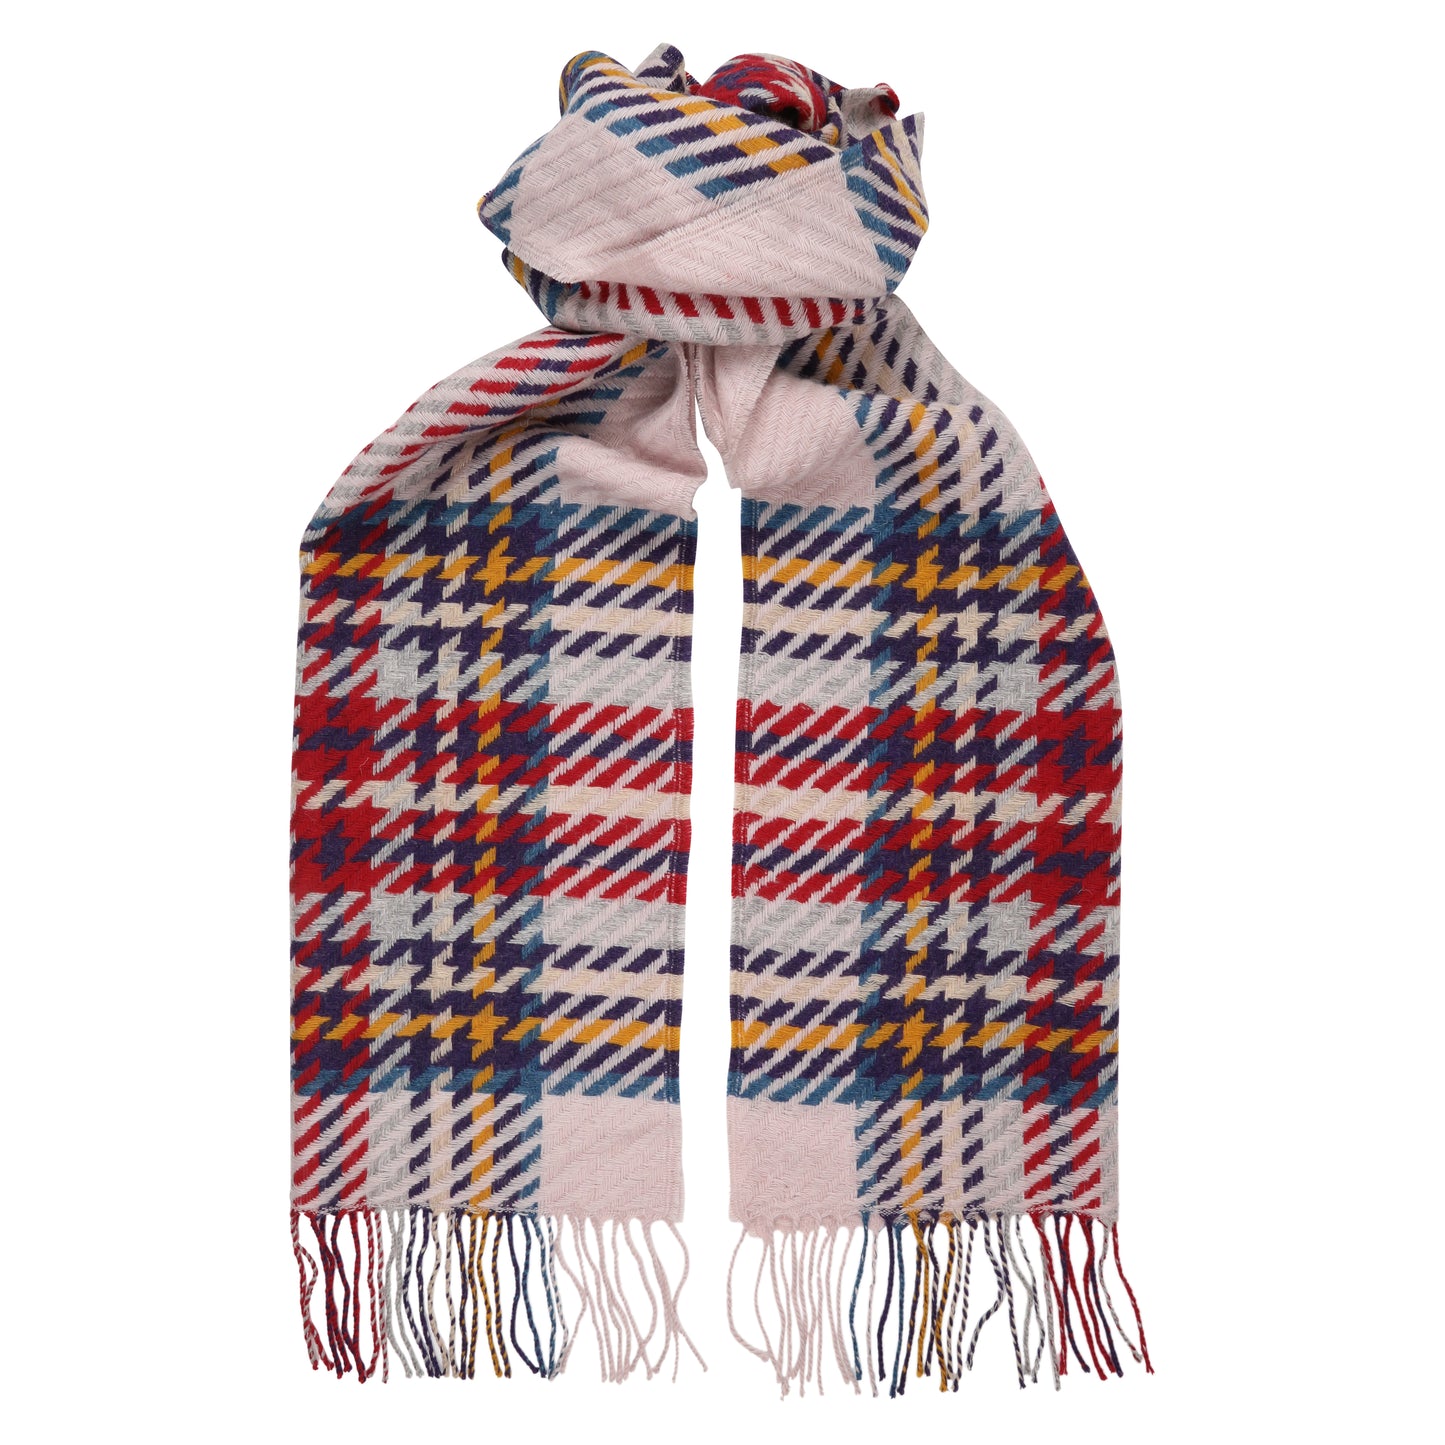 Calico Stewart Checked 100% Lambswool Long Warm Winter Scarf